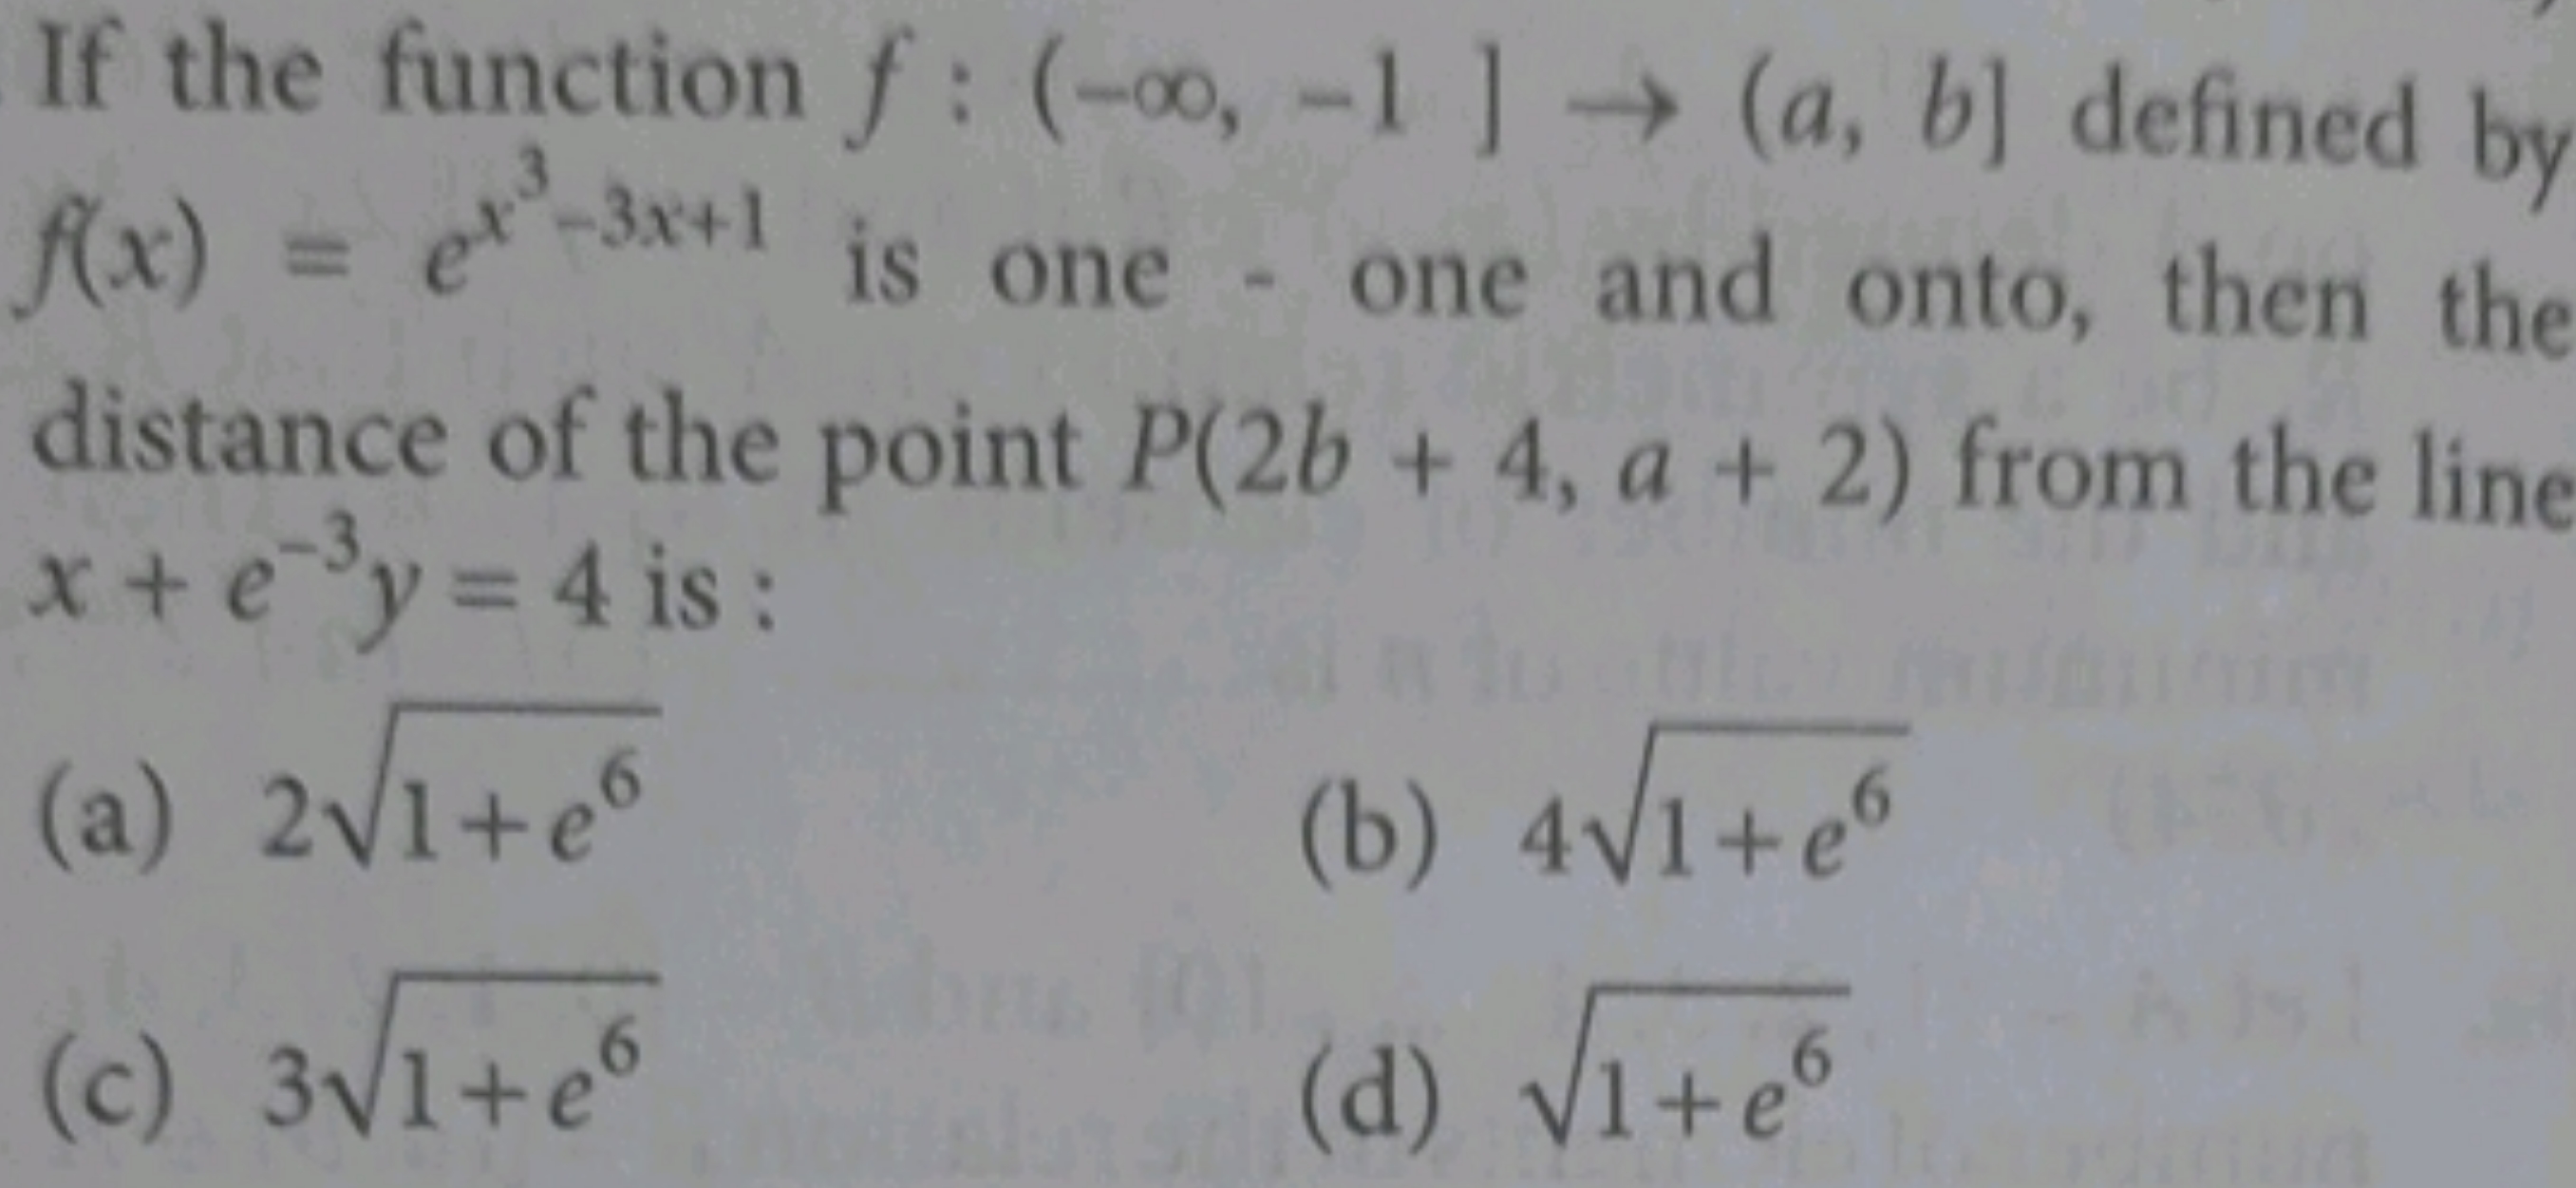 If the function f:(−∞,−1]→(a,b] defined by f(x)=ex3−3x+1 is one - one 